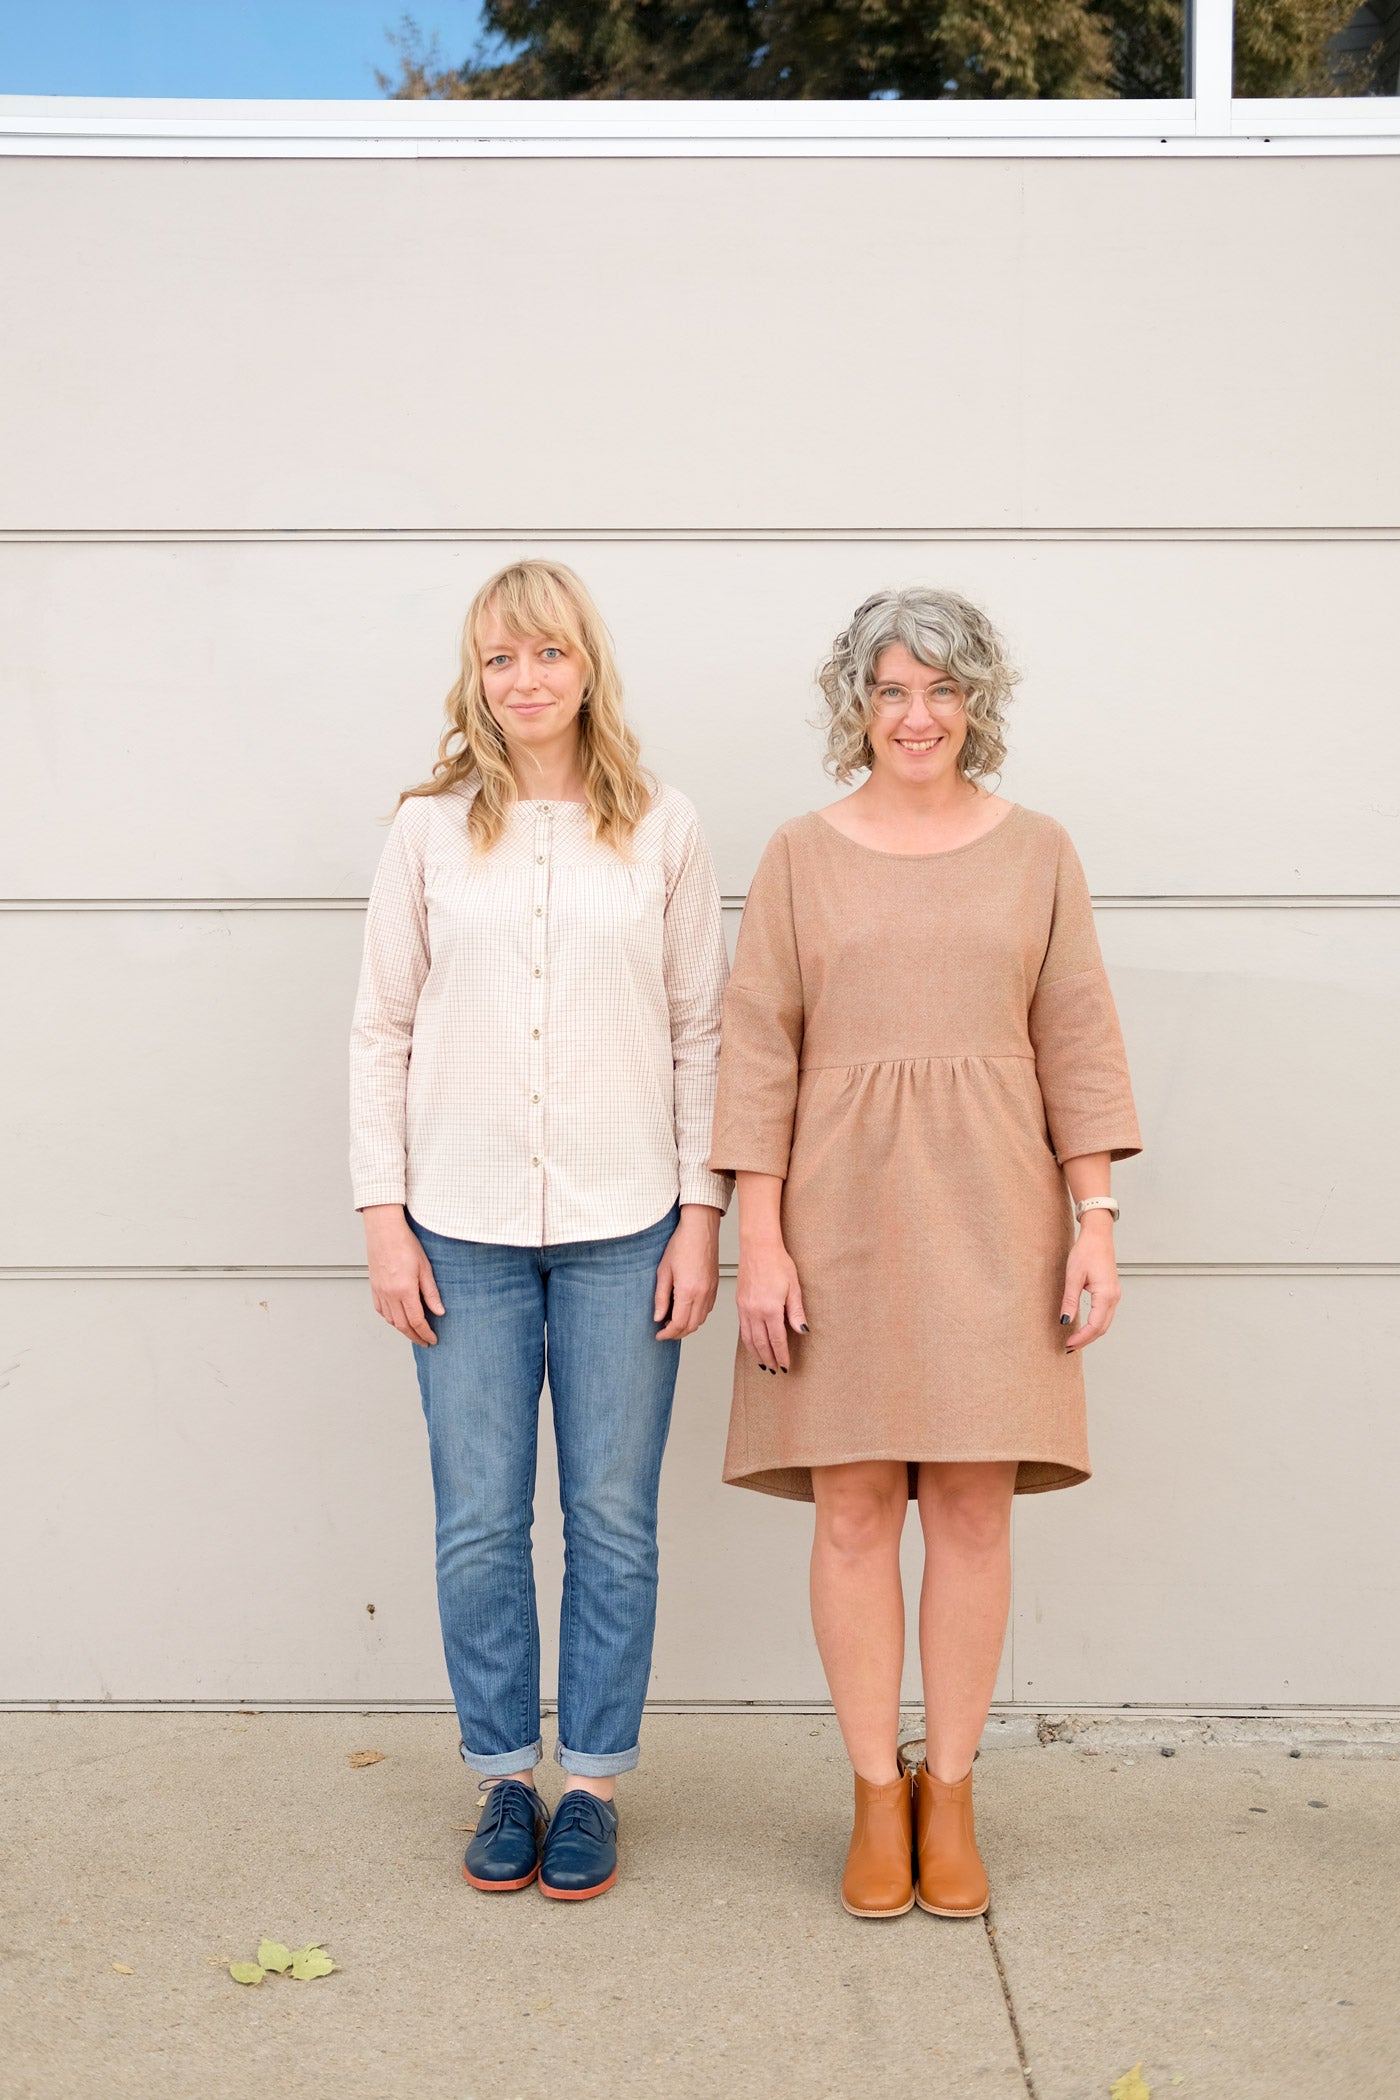 Two women standing in front of an off-white wall outside. One wears jeans and a light plaid button up shirt, and the other wears a light brownish knee-length dress with 3/4 sleeves and a gathered waist with pockets.